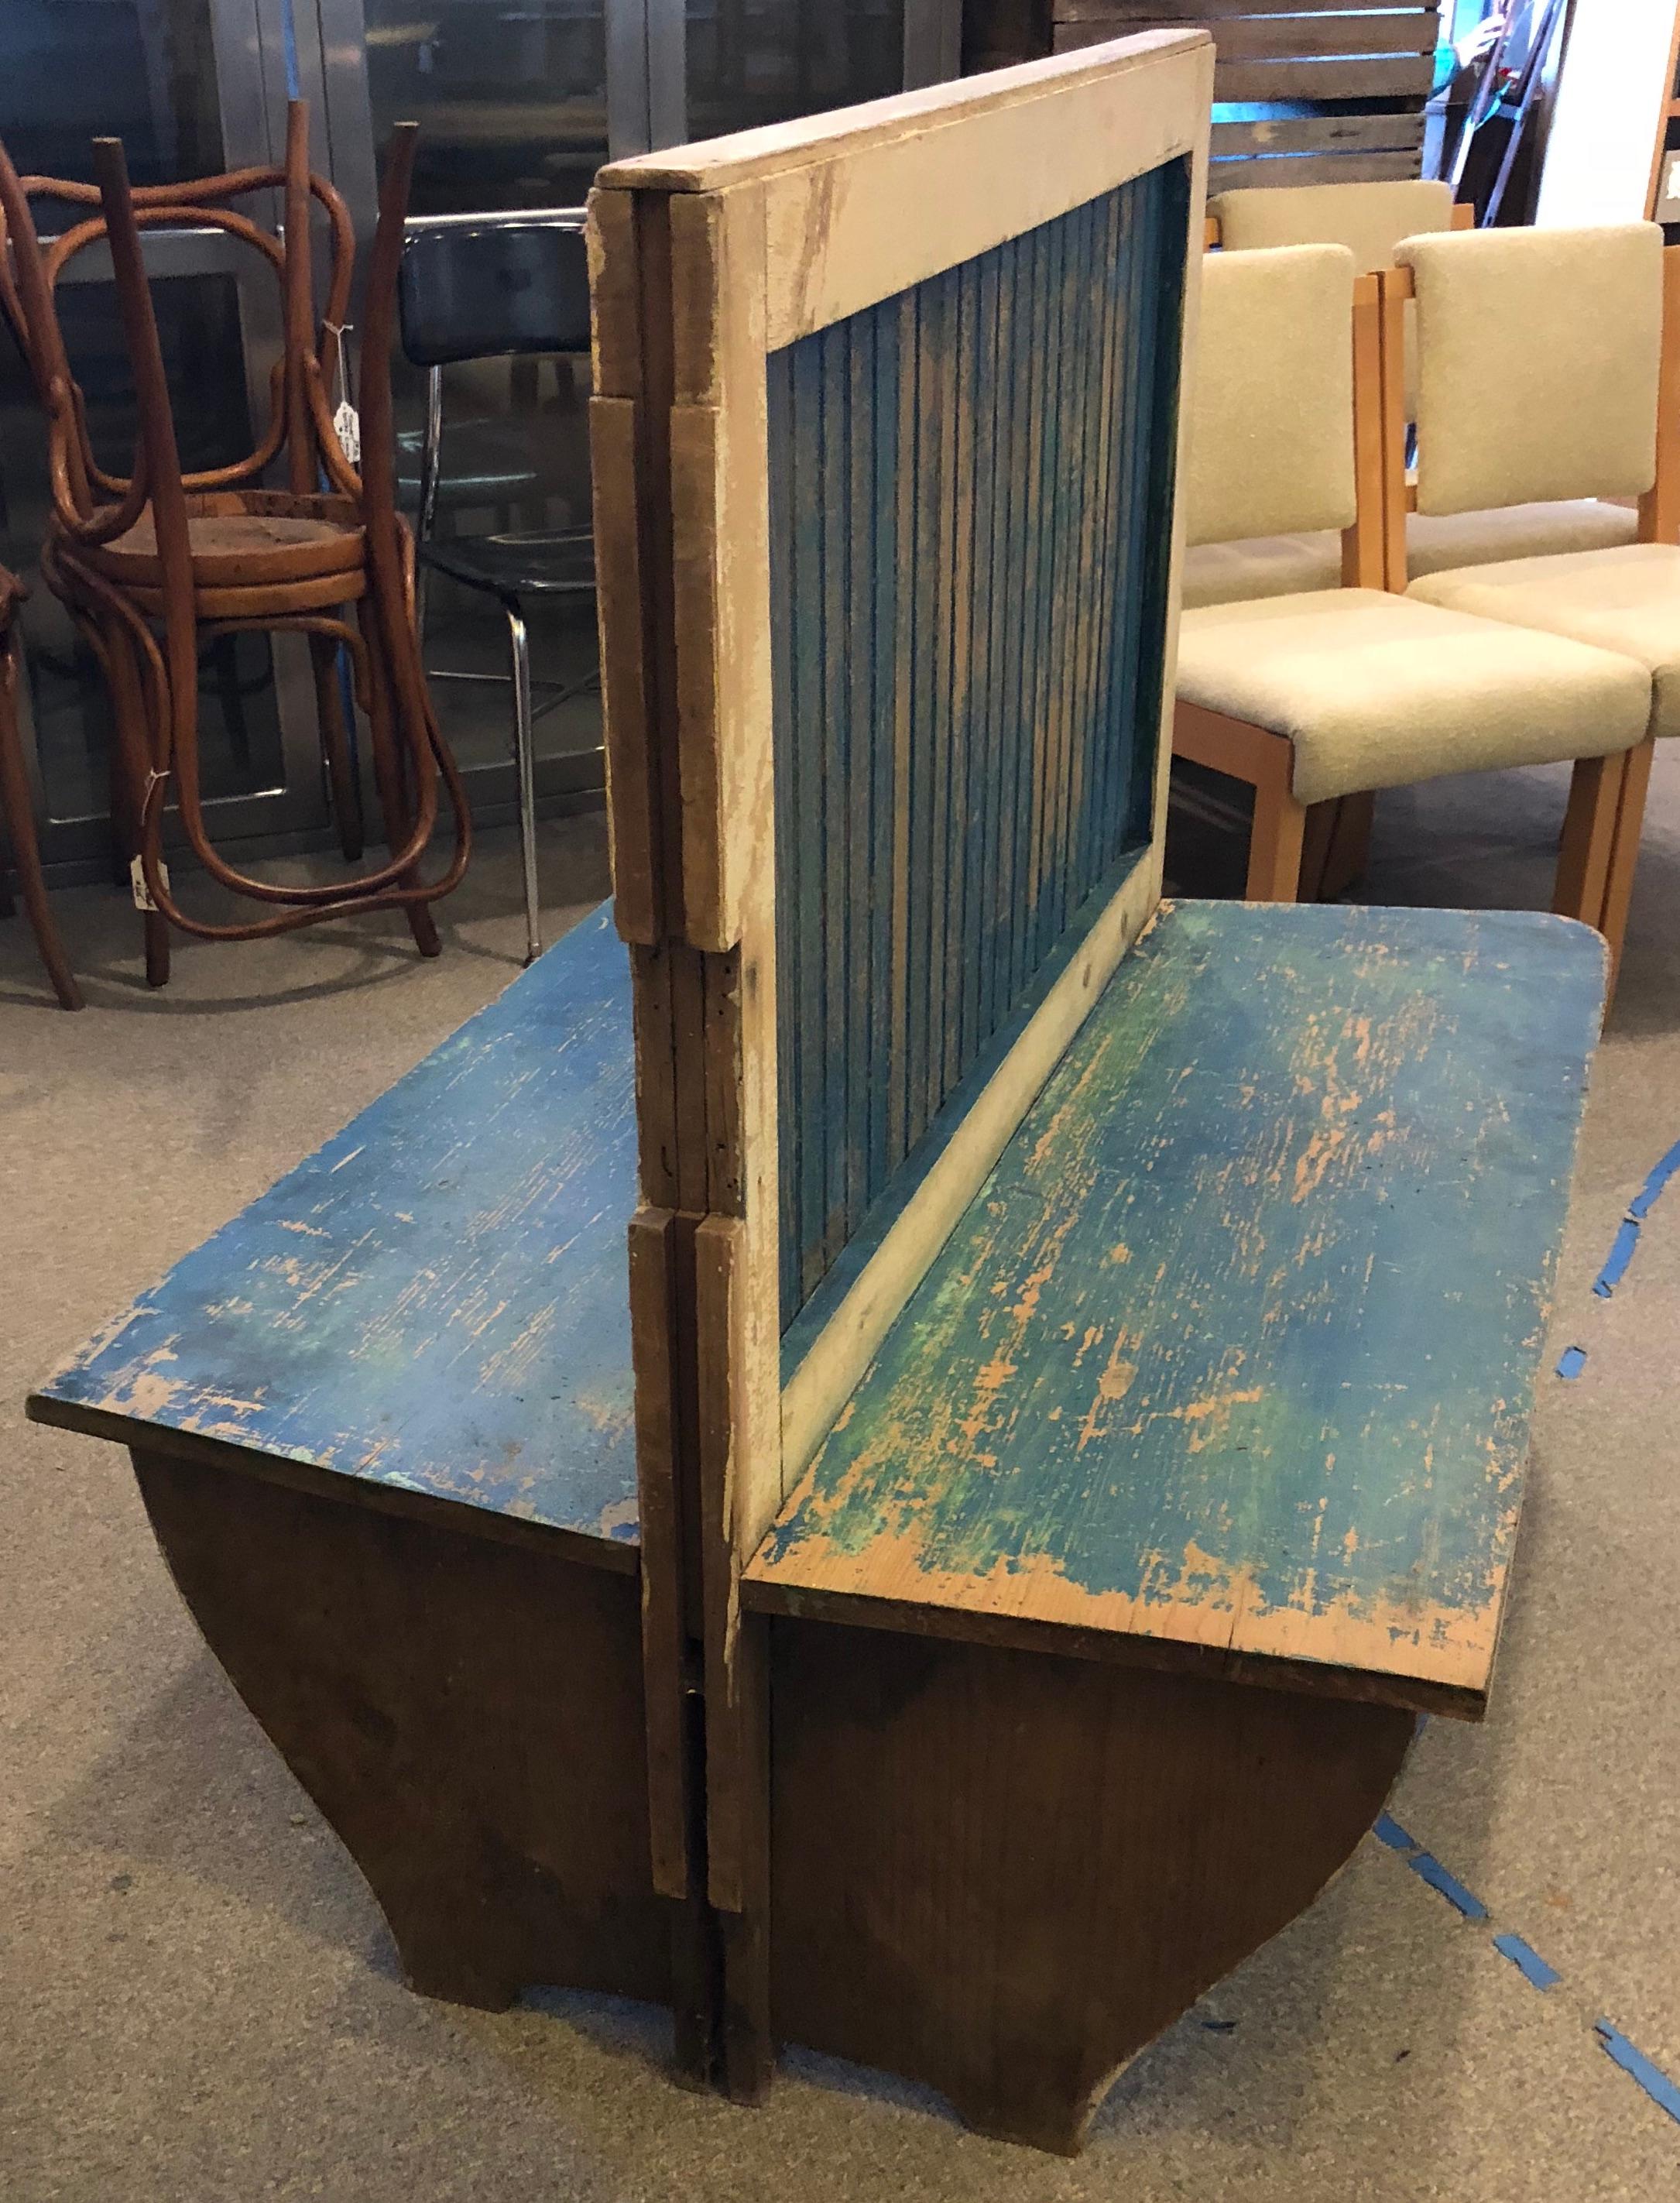 Bench from train depot, circa 1900s. Wooden, 2 sided with original blue paint. Sturdy, functional. Ideal entranceway hallway bench for putting on boots and shoes. Coat with spar varnish and use outdoors on porch, deck, patio or in the garden.